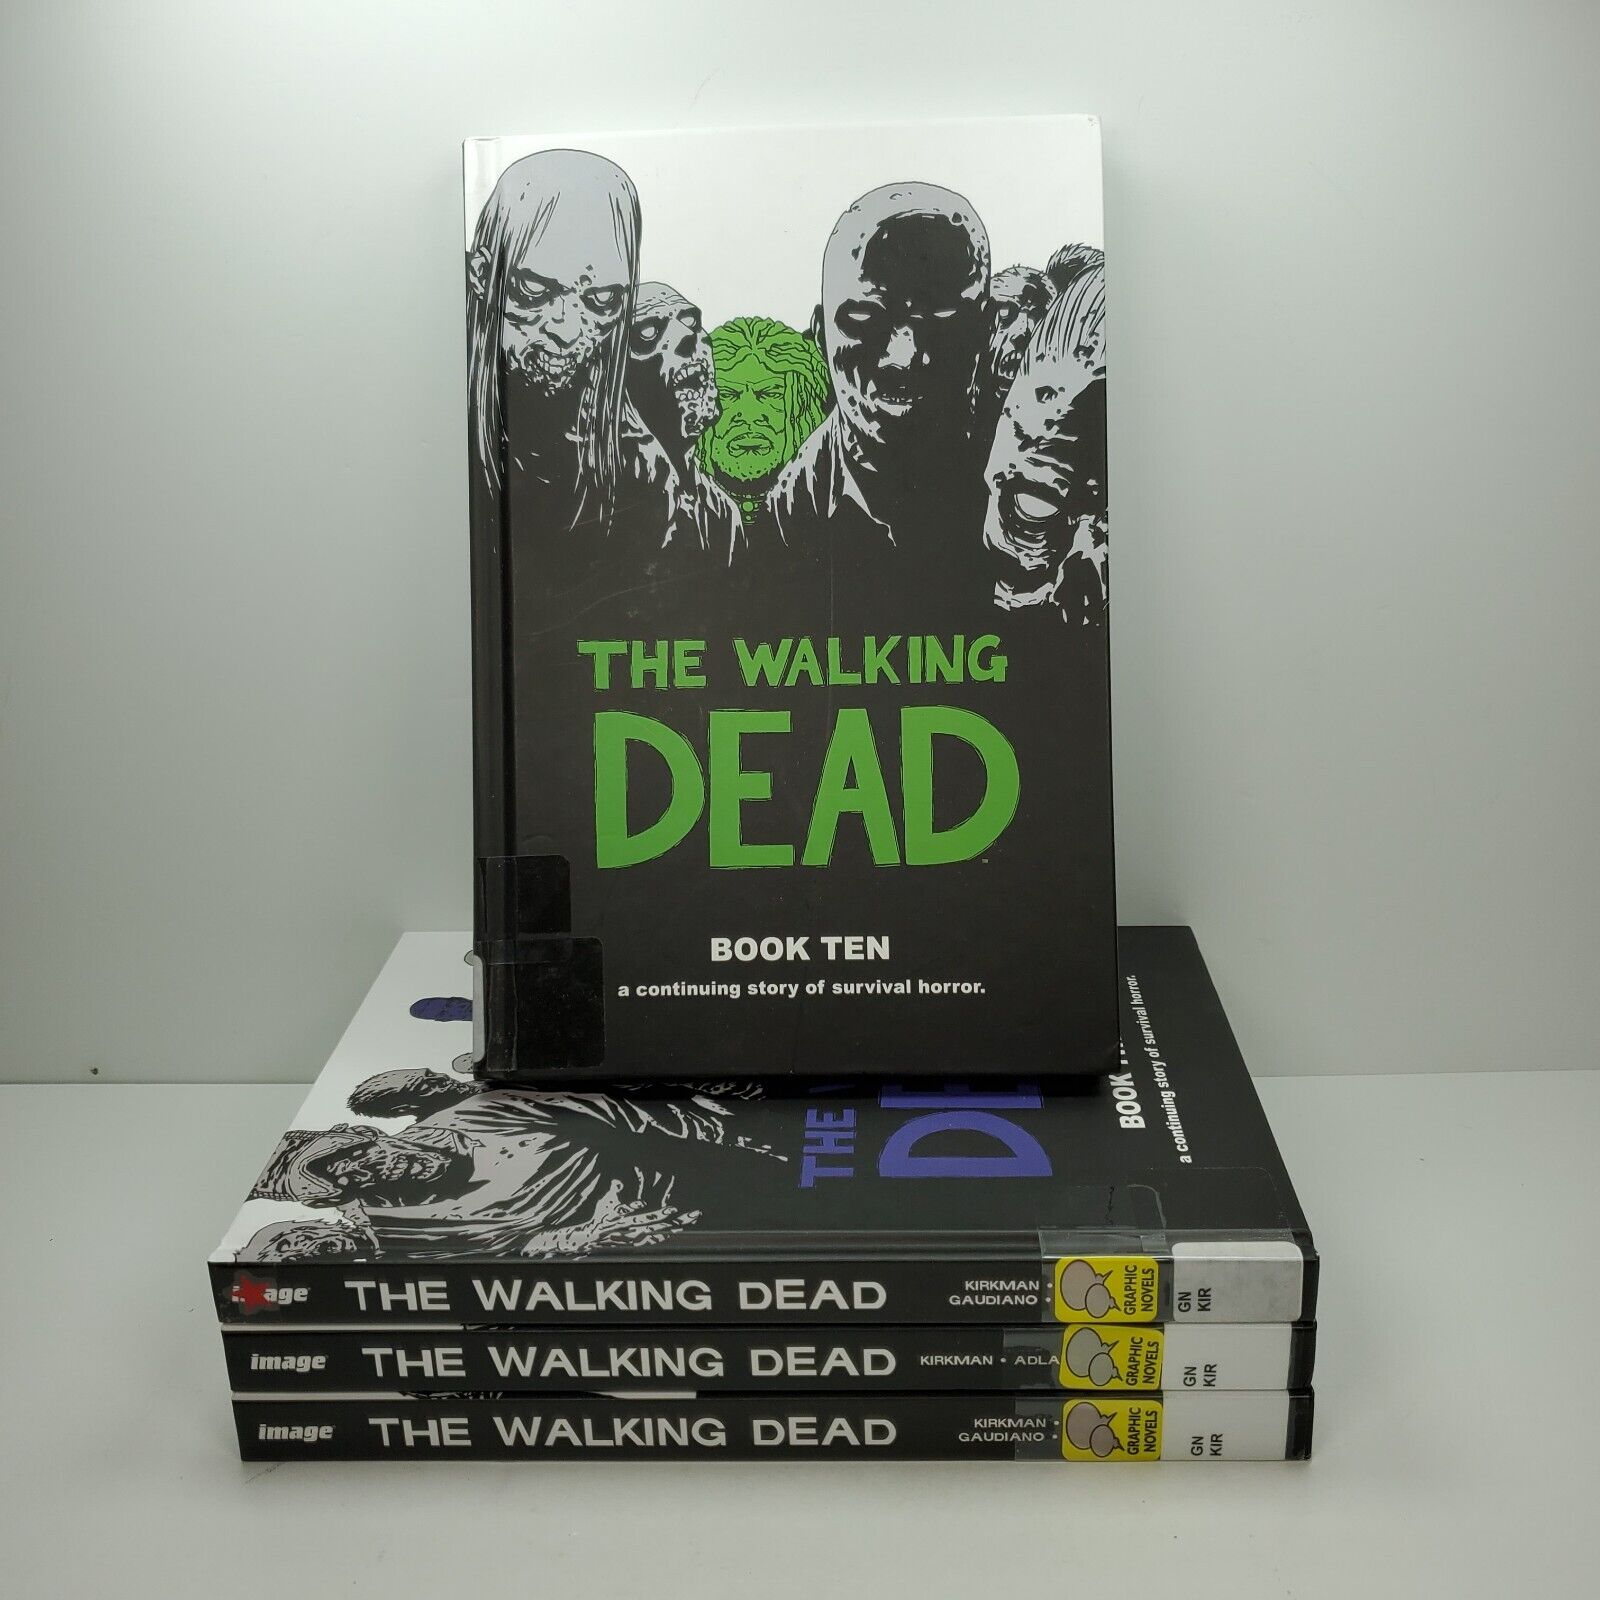 The Walking Dead Image Comics Graphic Novels Books 9-12 (Hardcover Book Lot)